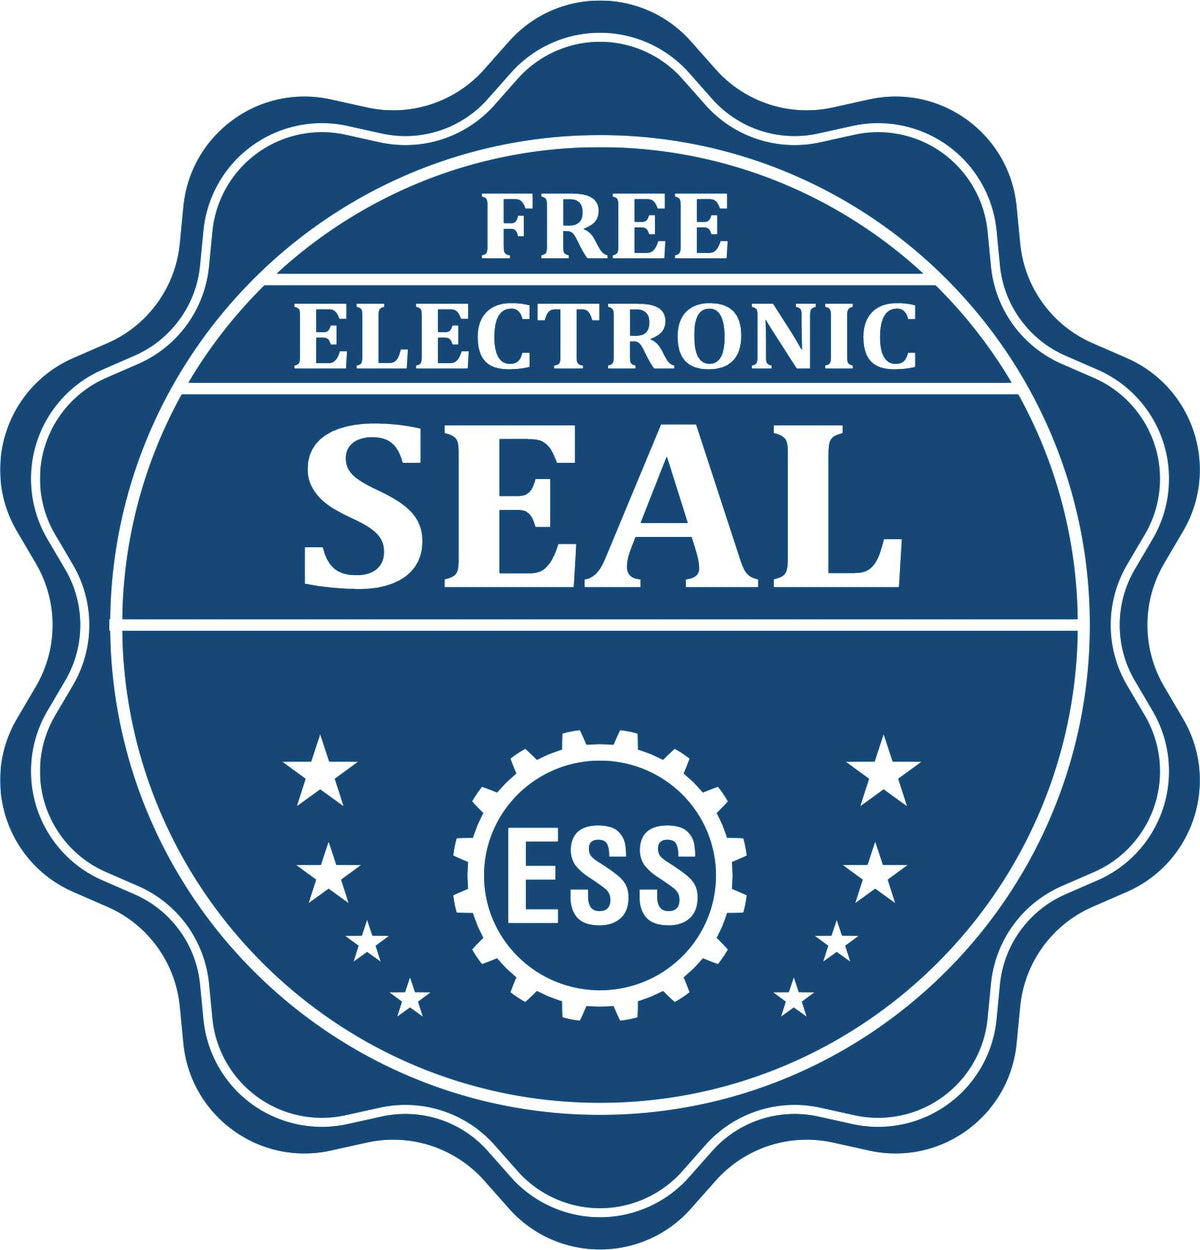 A badge showing a free electronic seal for the Gift Arizona Land Surveyor Seal with stars and the ESS gear on the emblem.